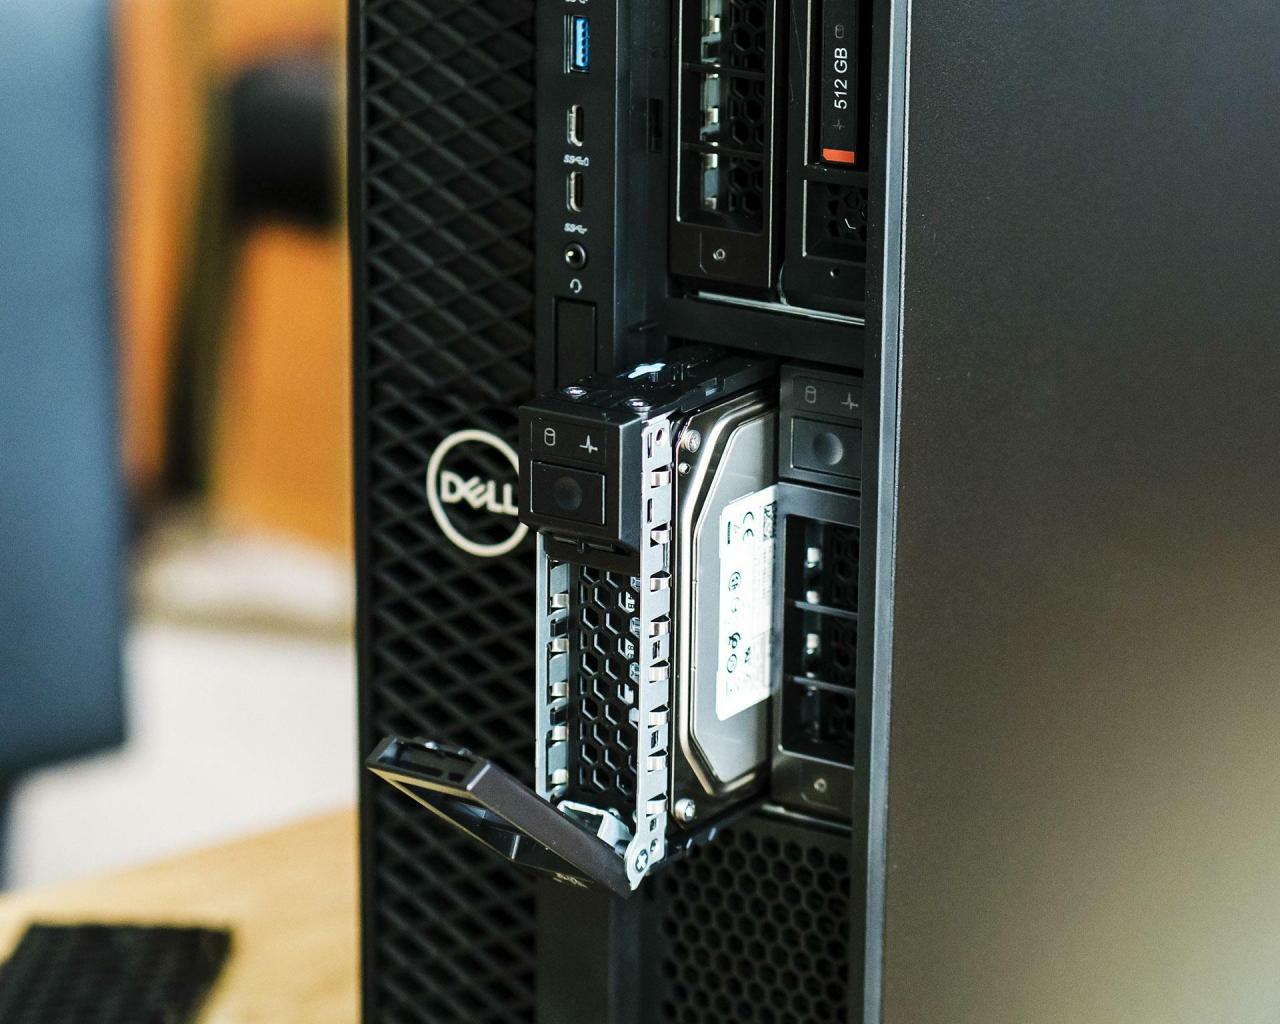 Dell Workstation With a Hot Swappable Hard Drive